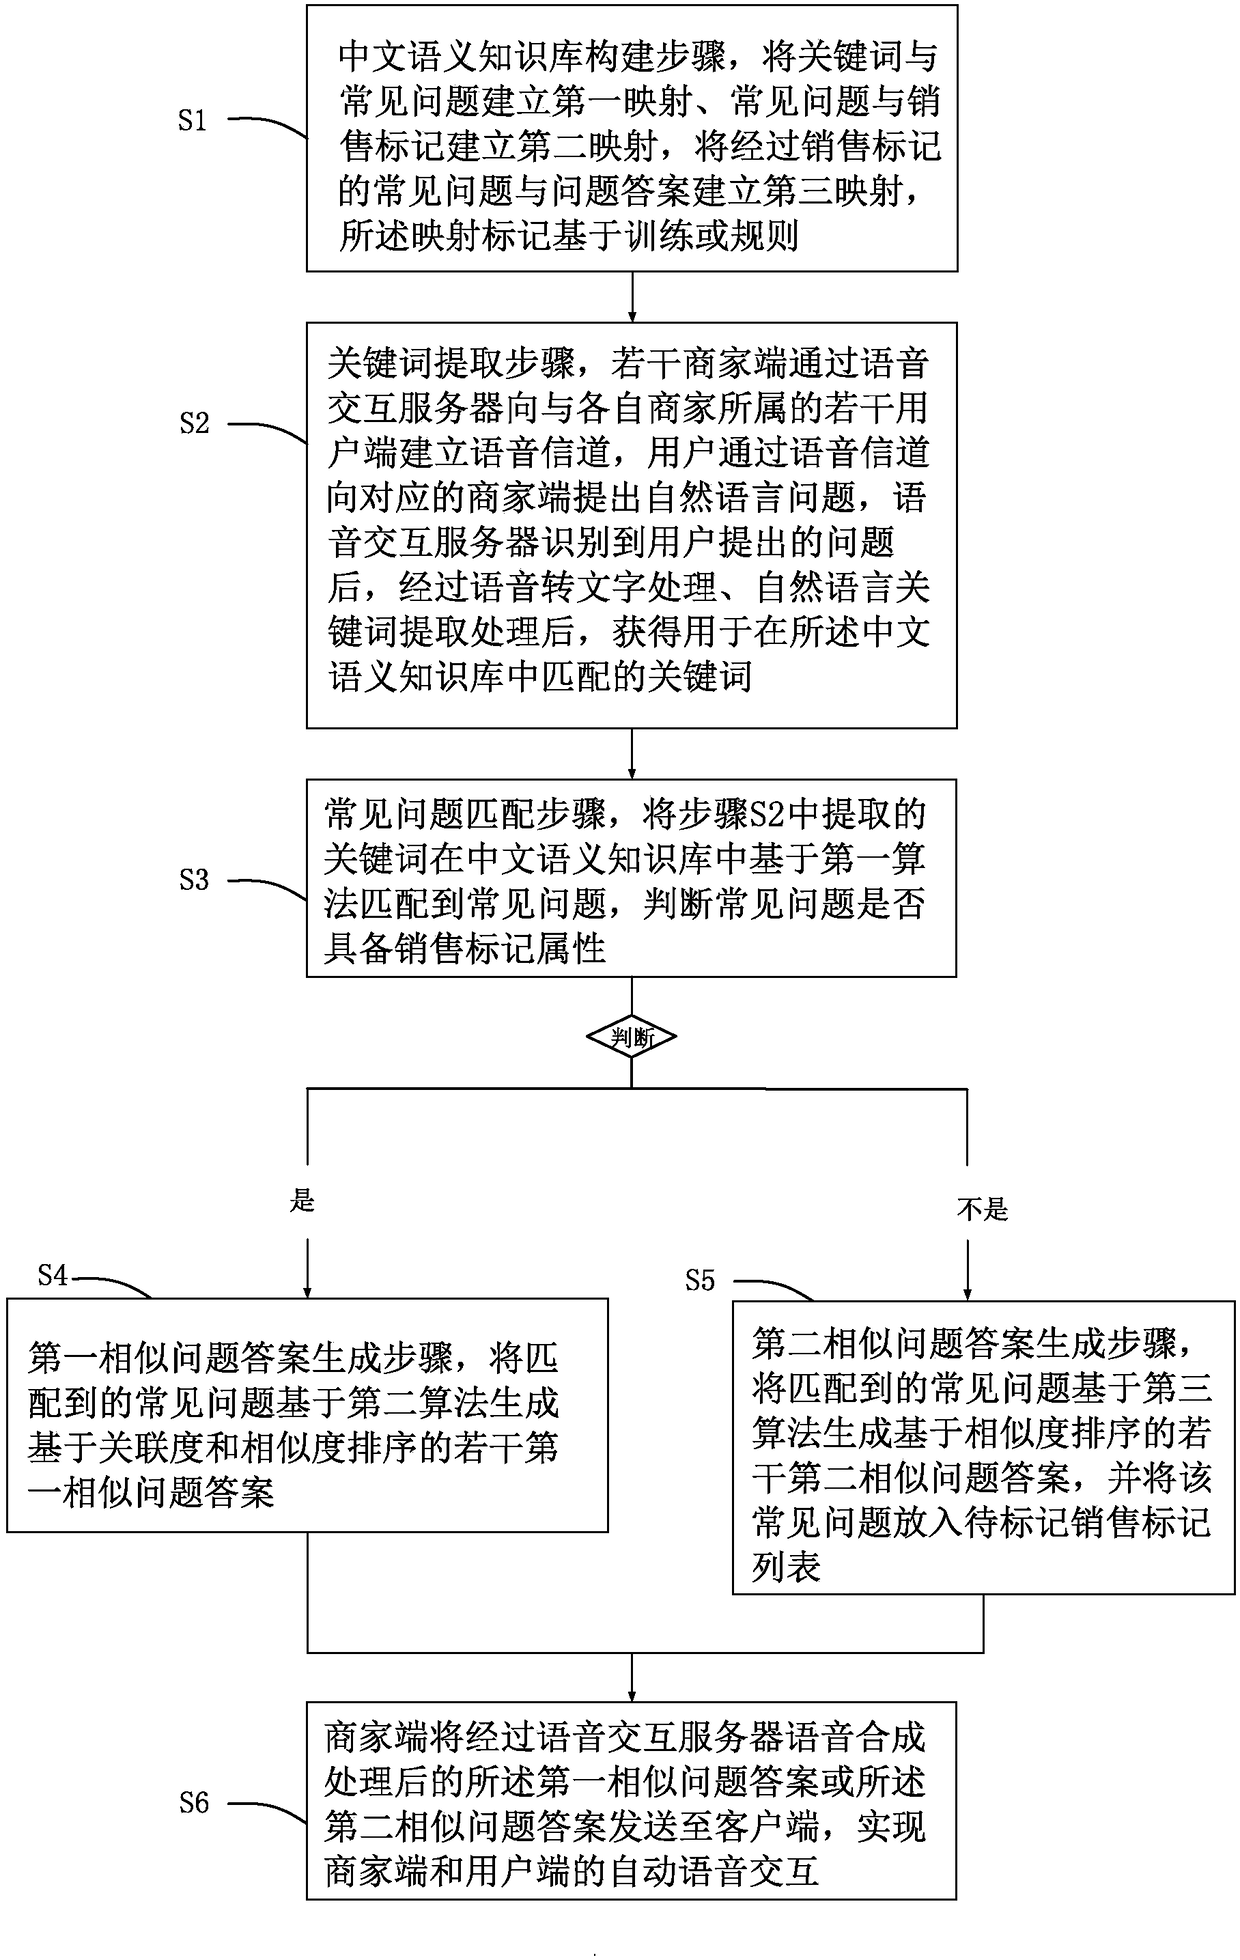 A Chinese similar problem generation system and method